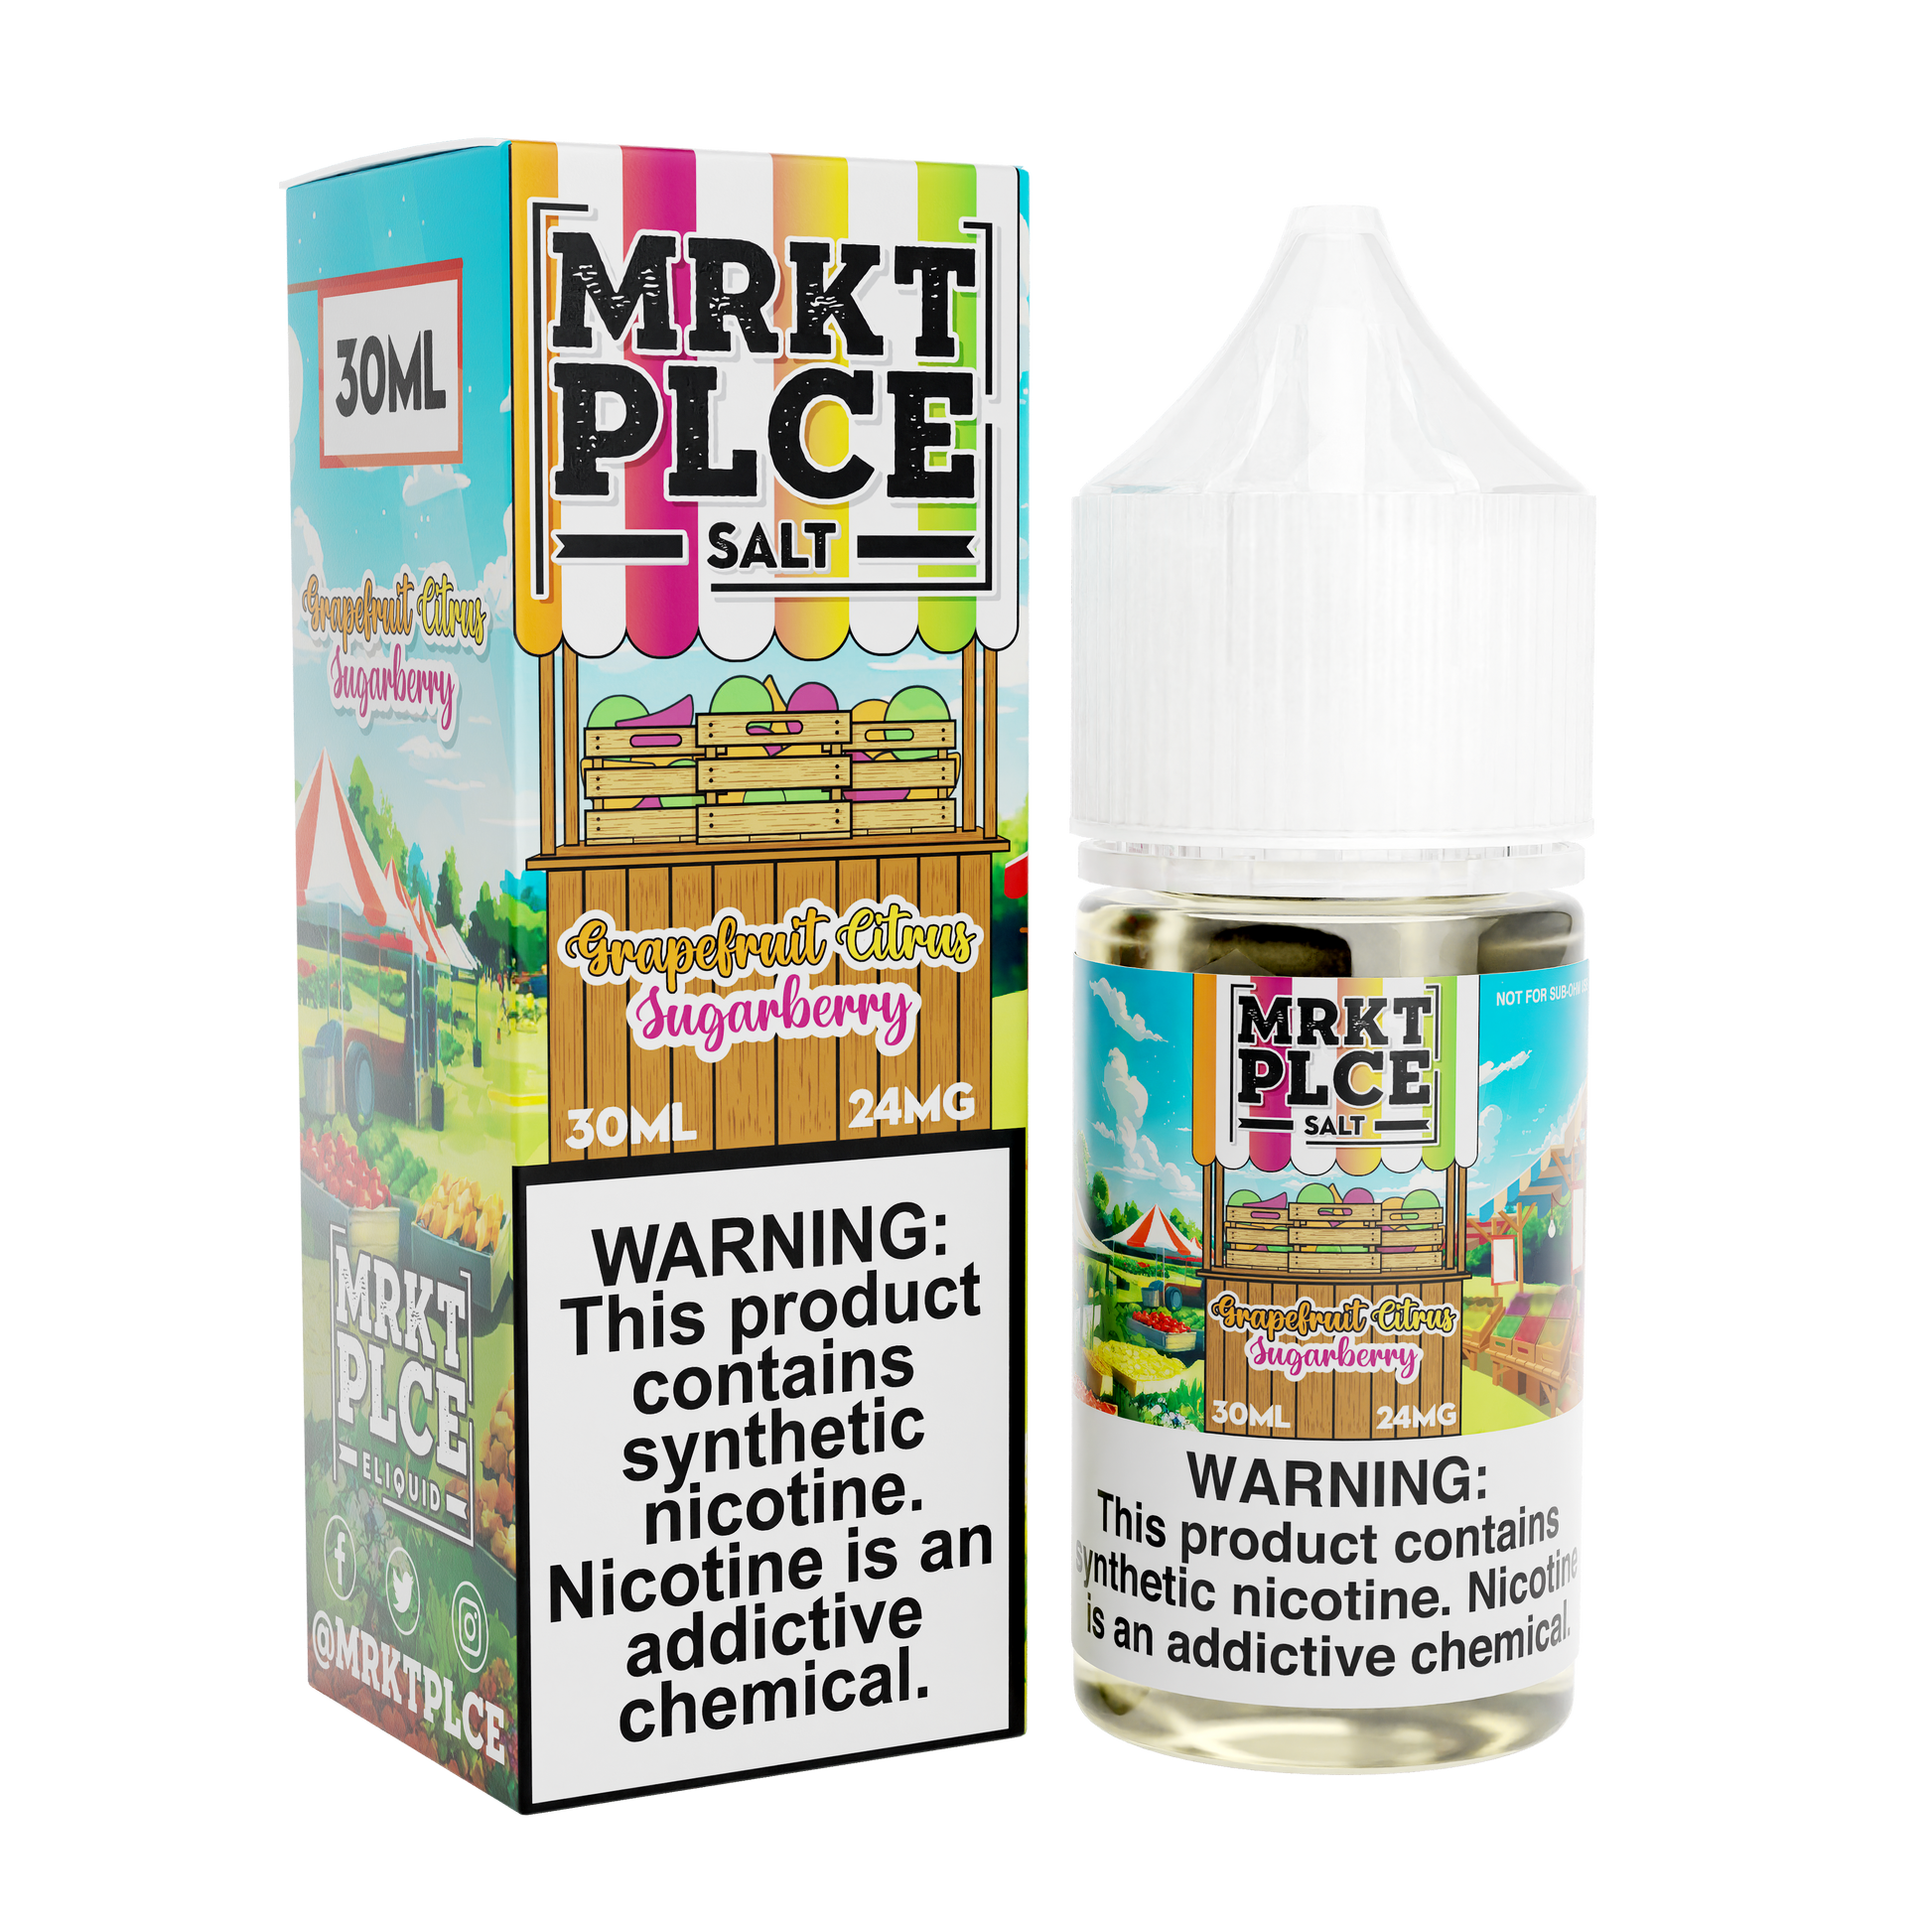 Grapefruit Citrus Sugarberry by MRKT PLCE Salts Series 30mL with Packaging